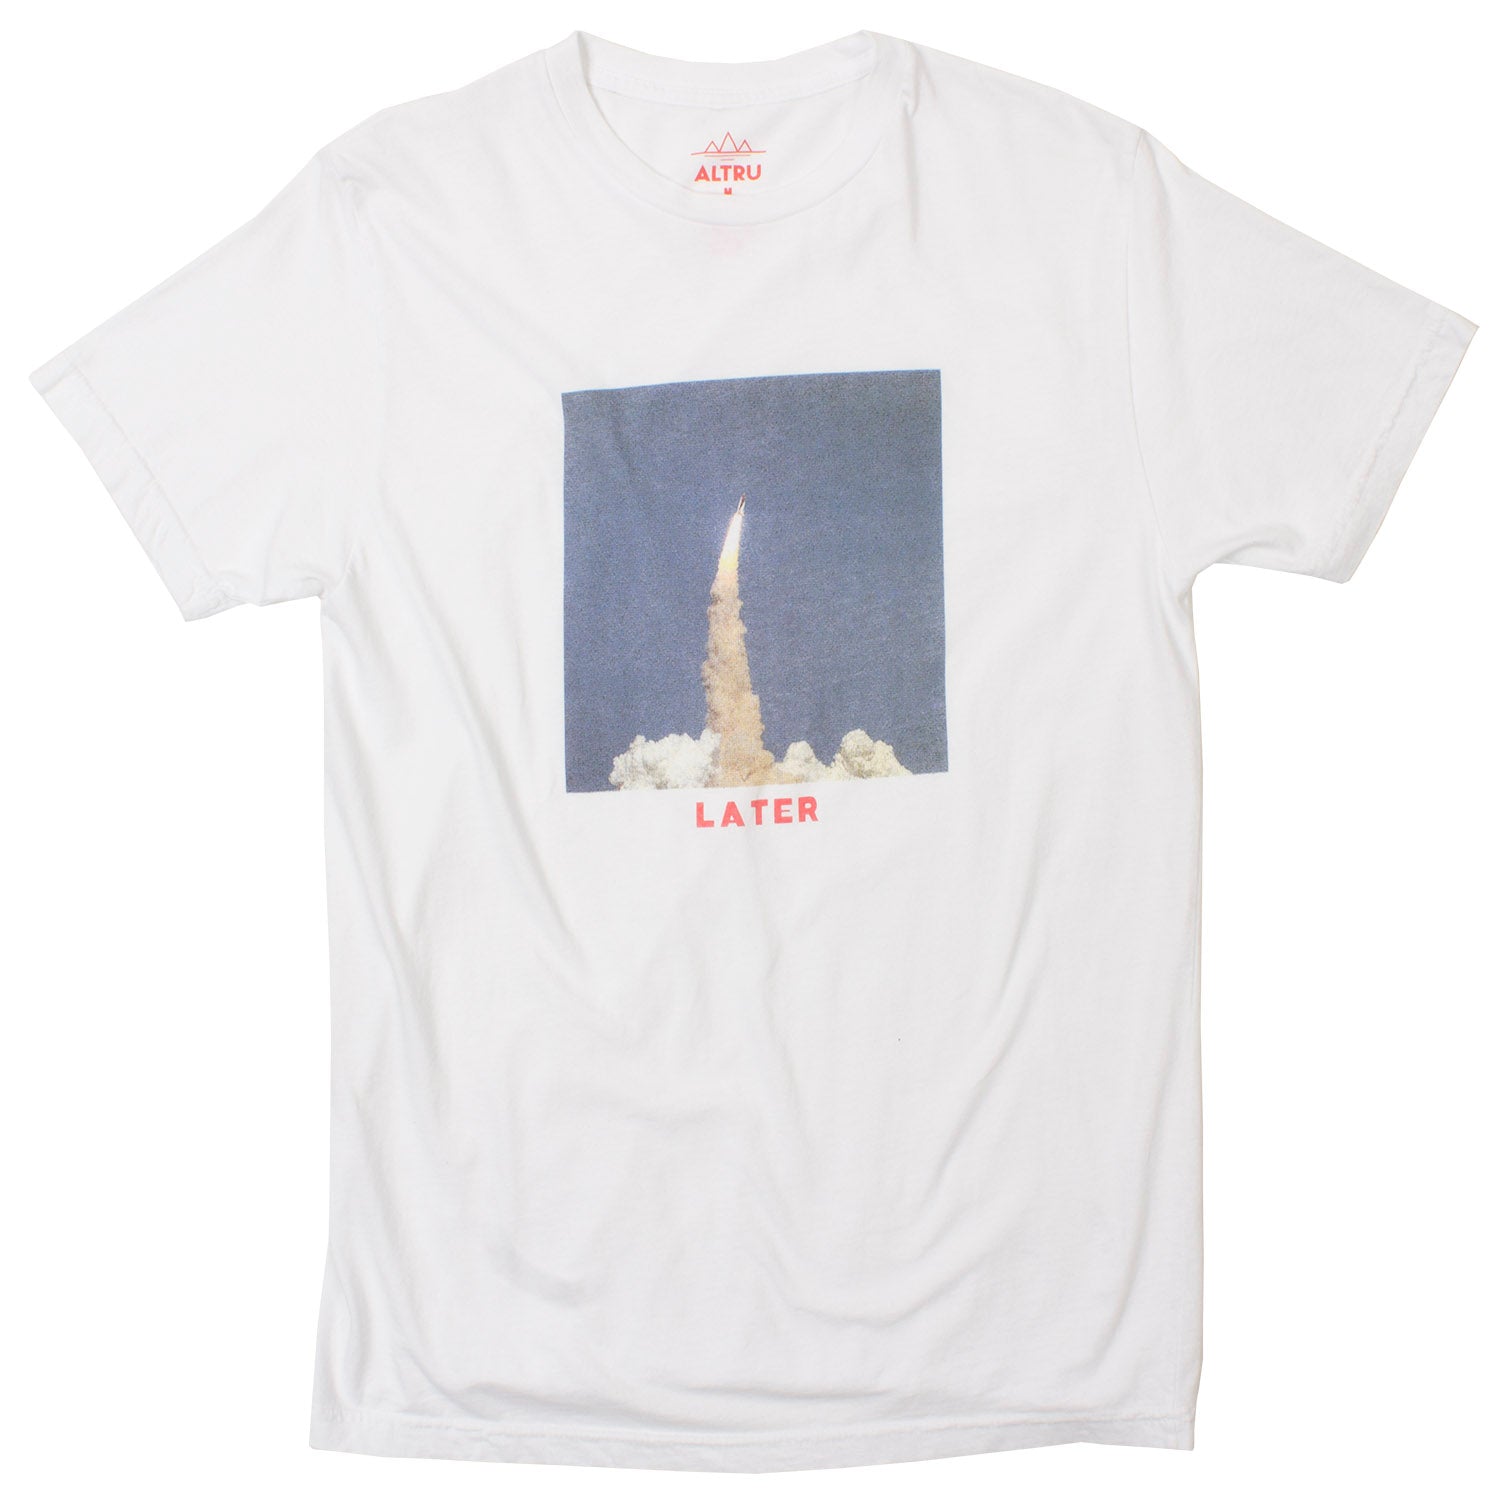 Photo of Later Rocket graphic tee by Altru Apparel